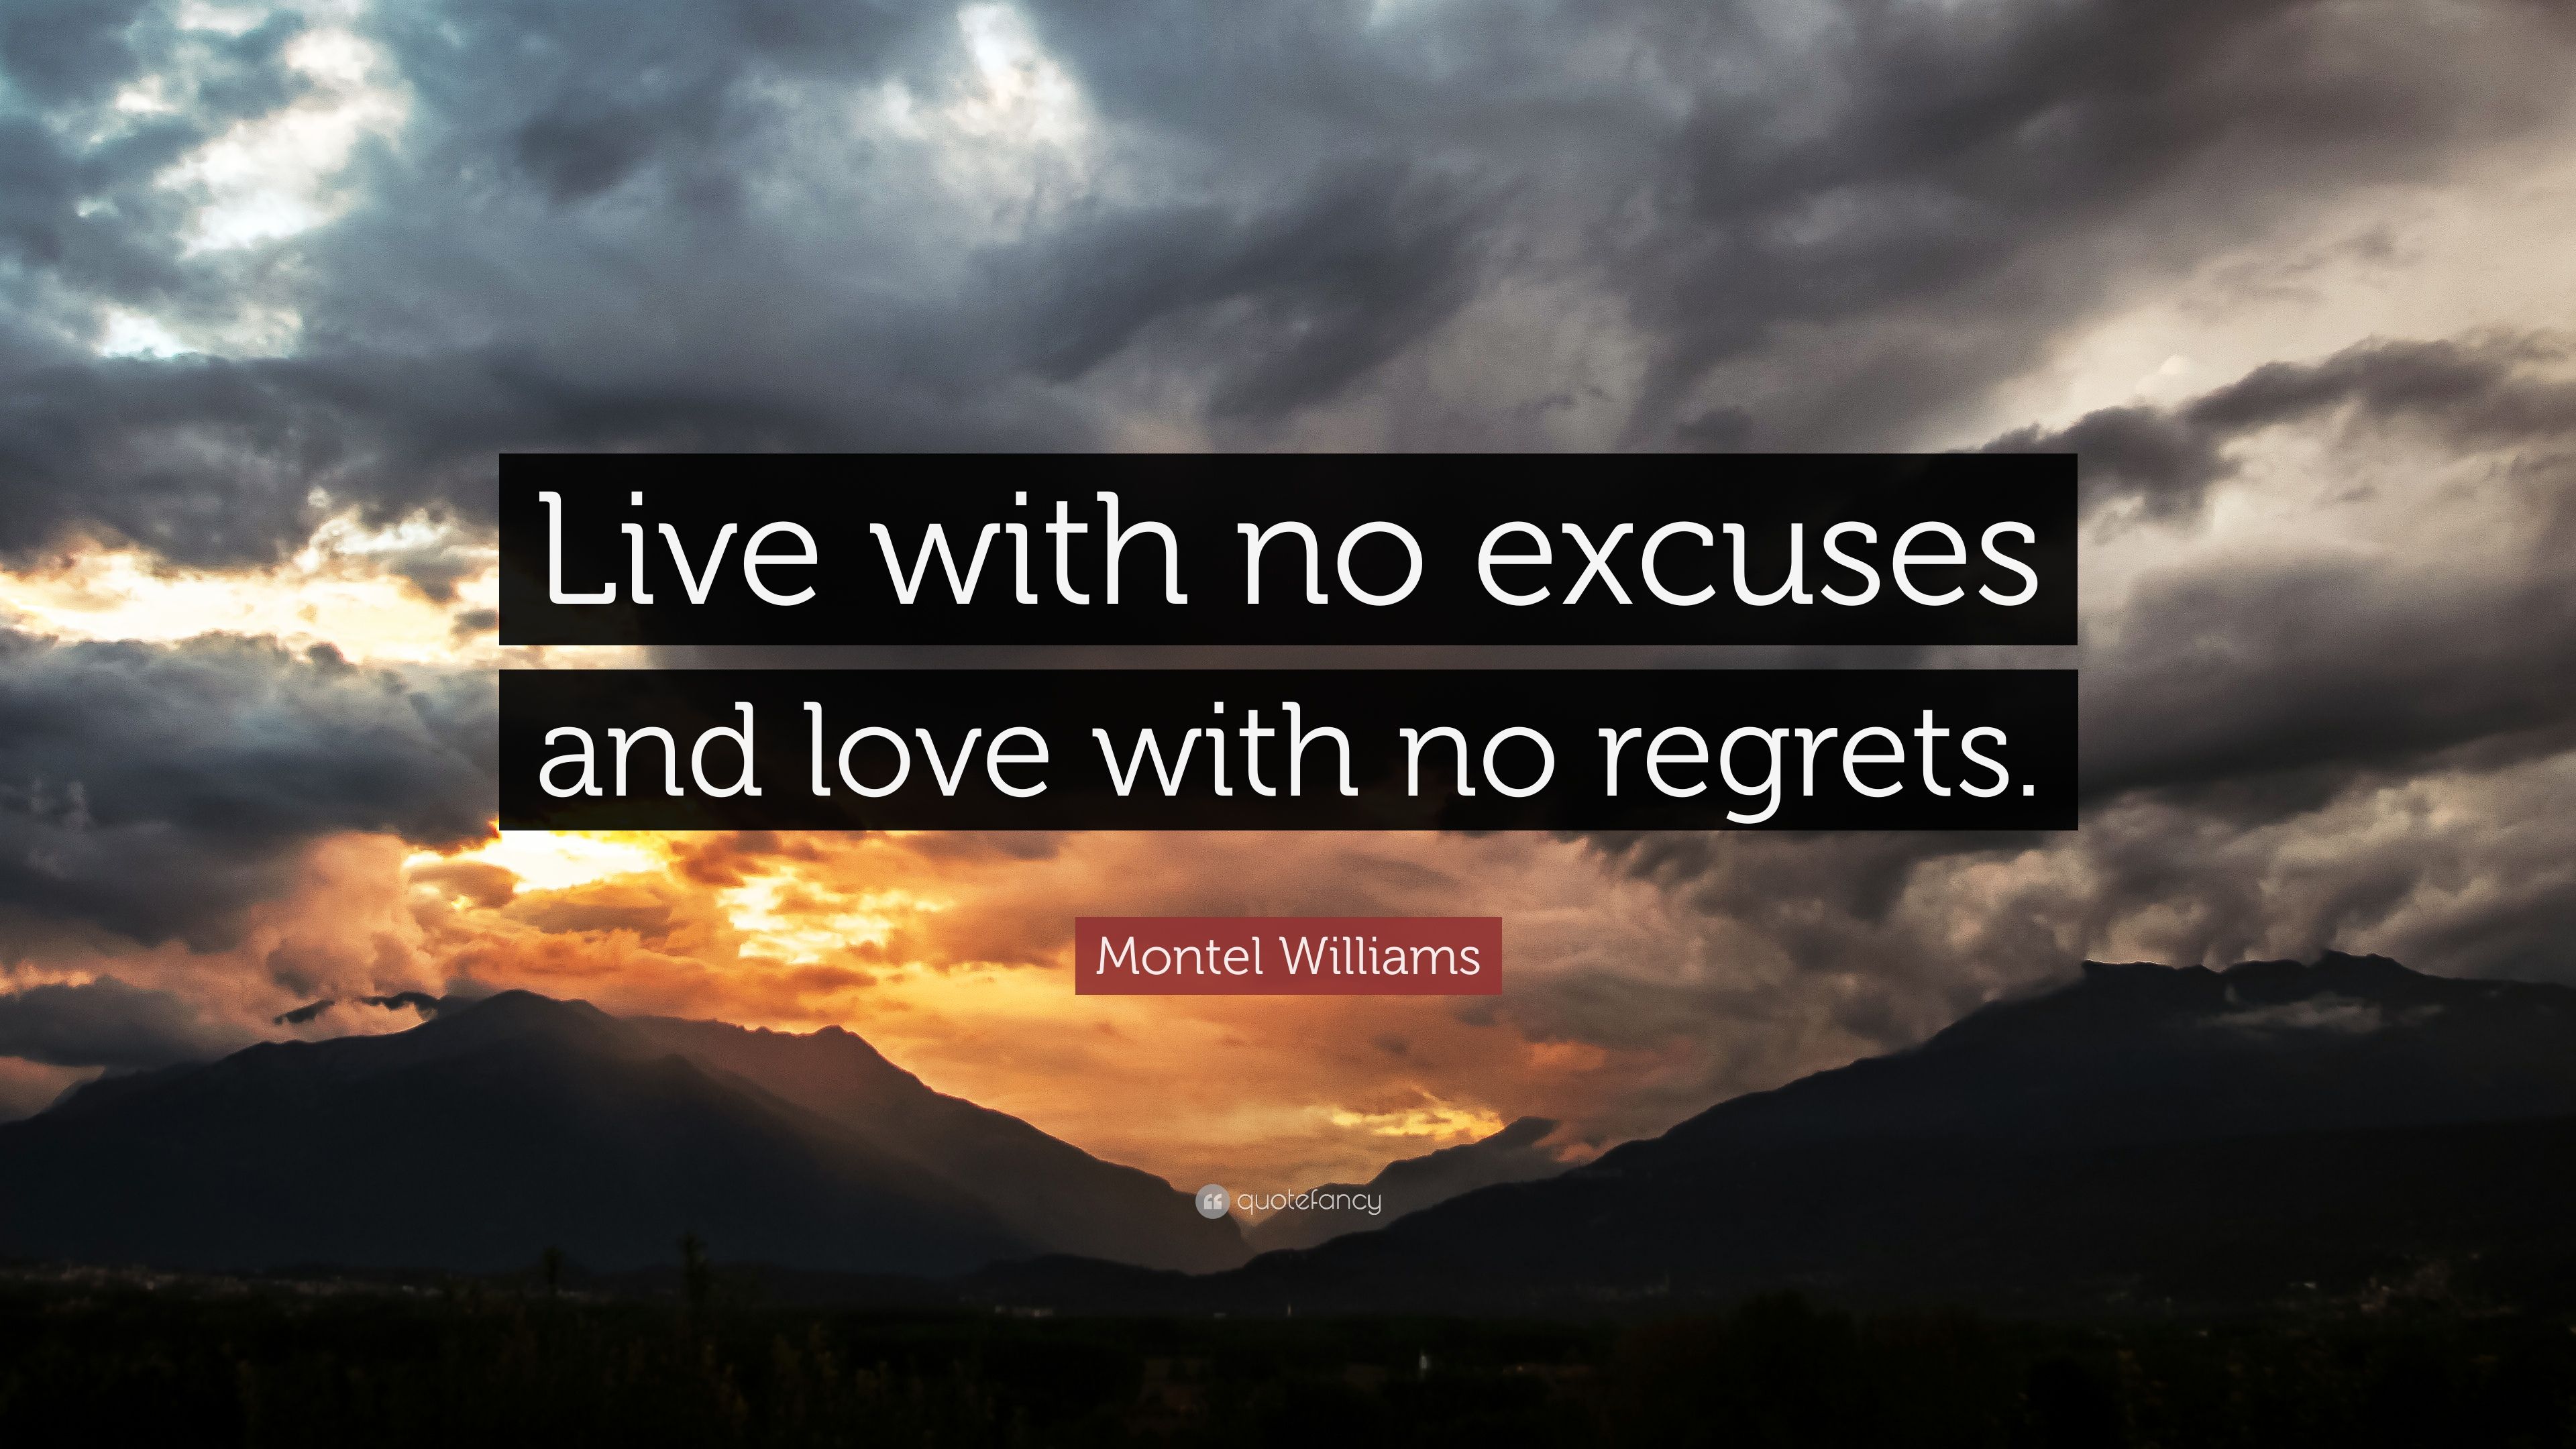 Montel Williams Quote: “Live with no excuses and love with no regrets.” (9 wallpaper)